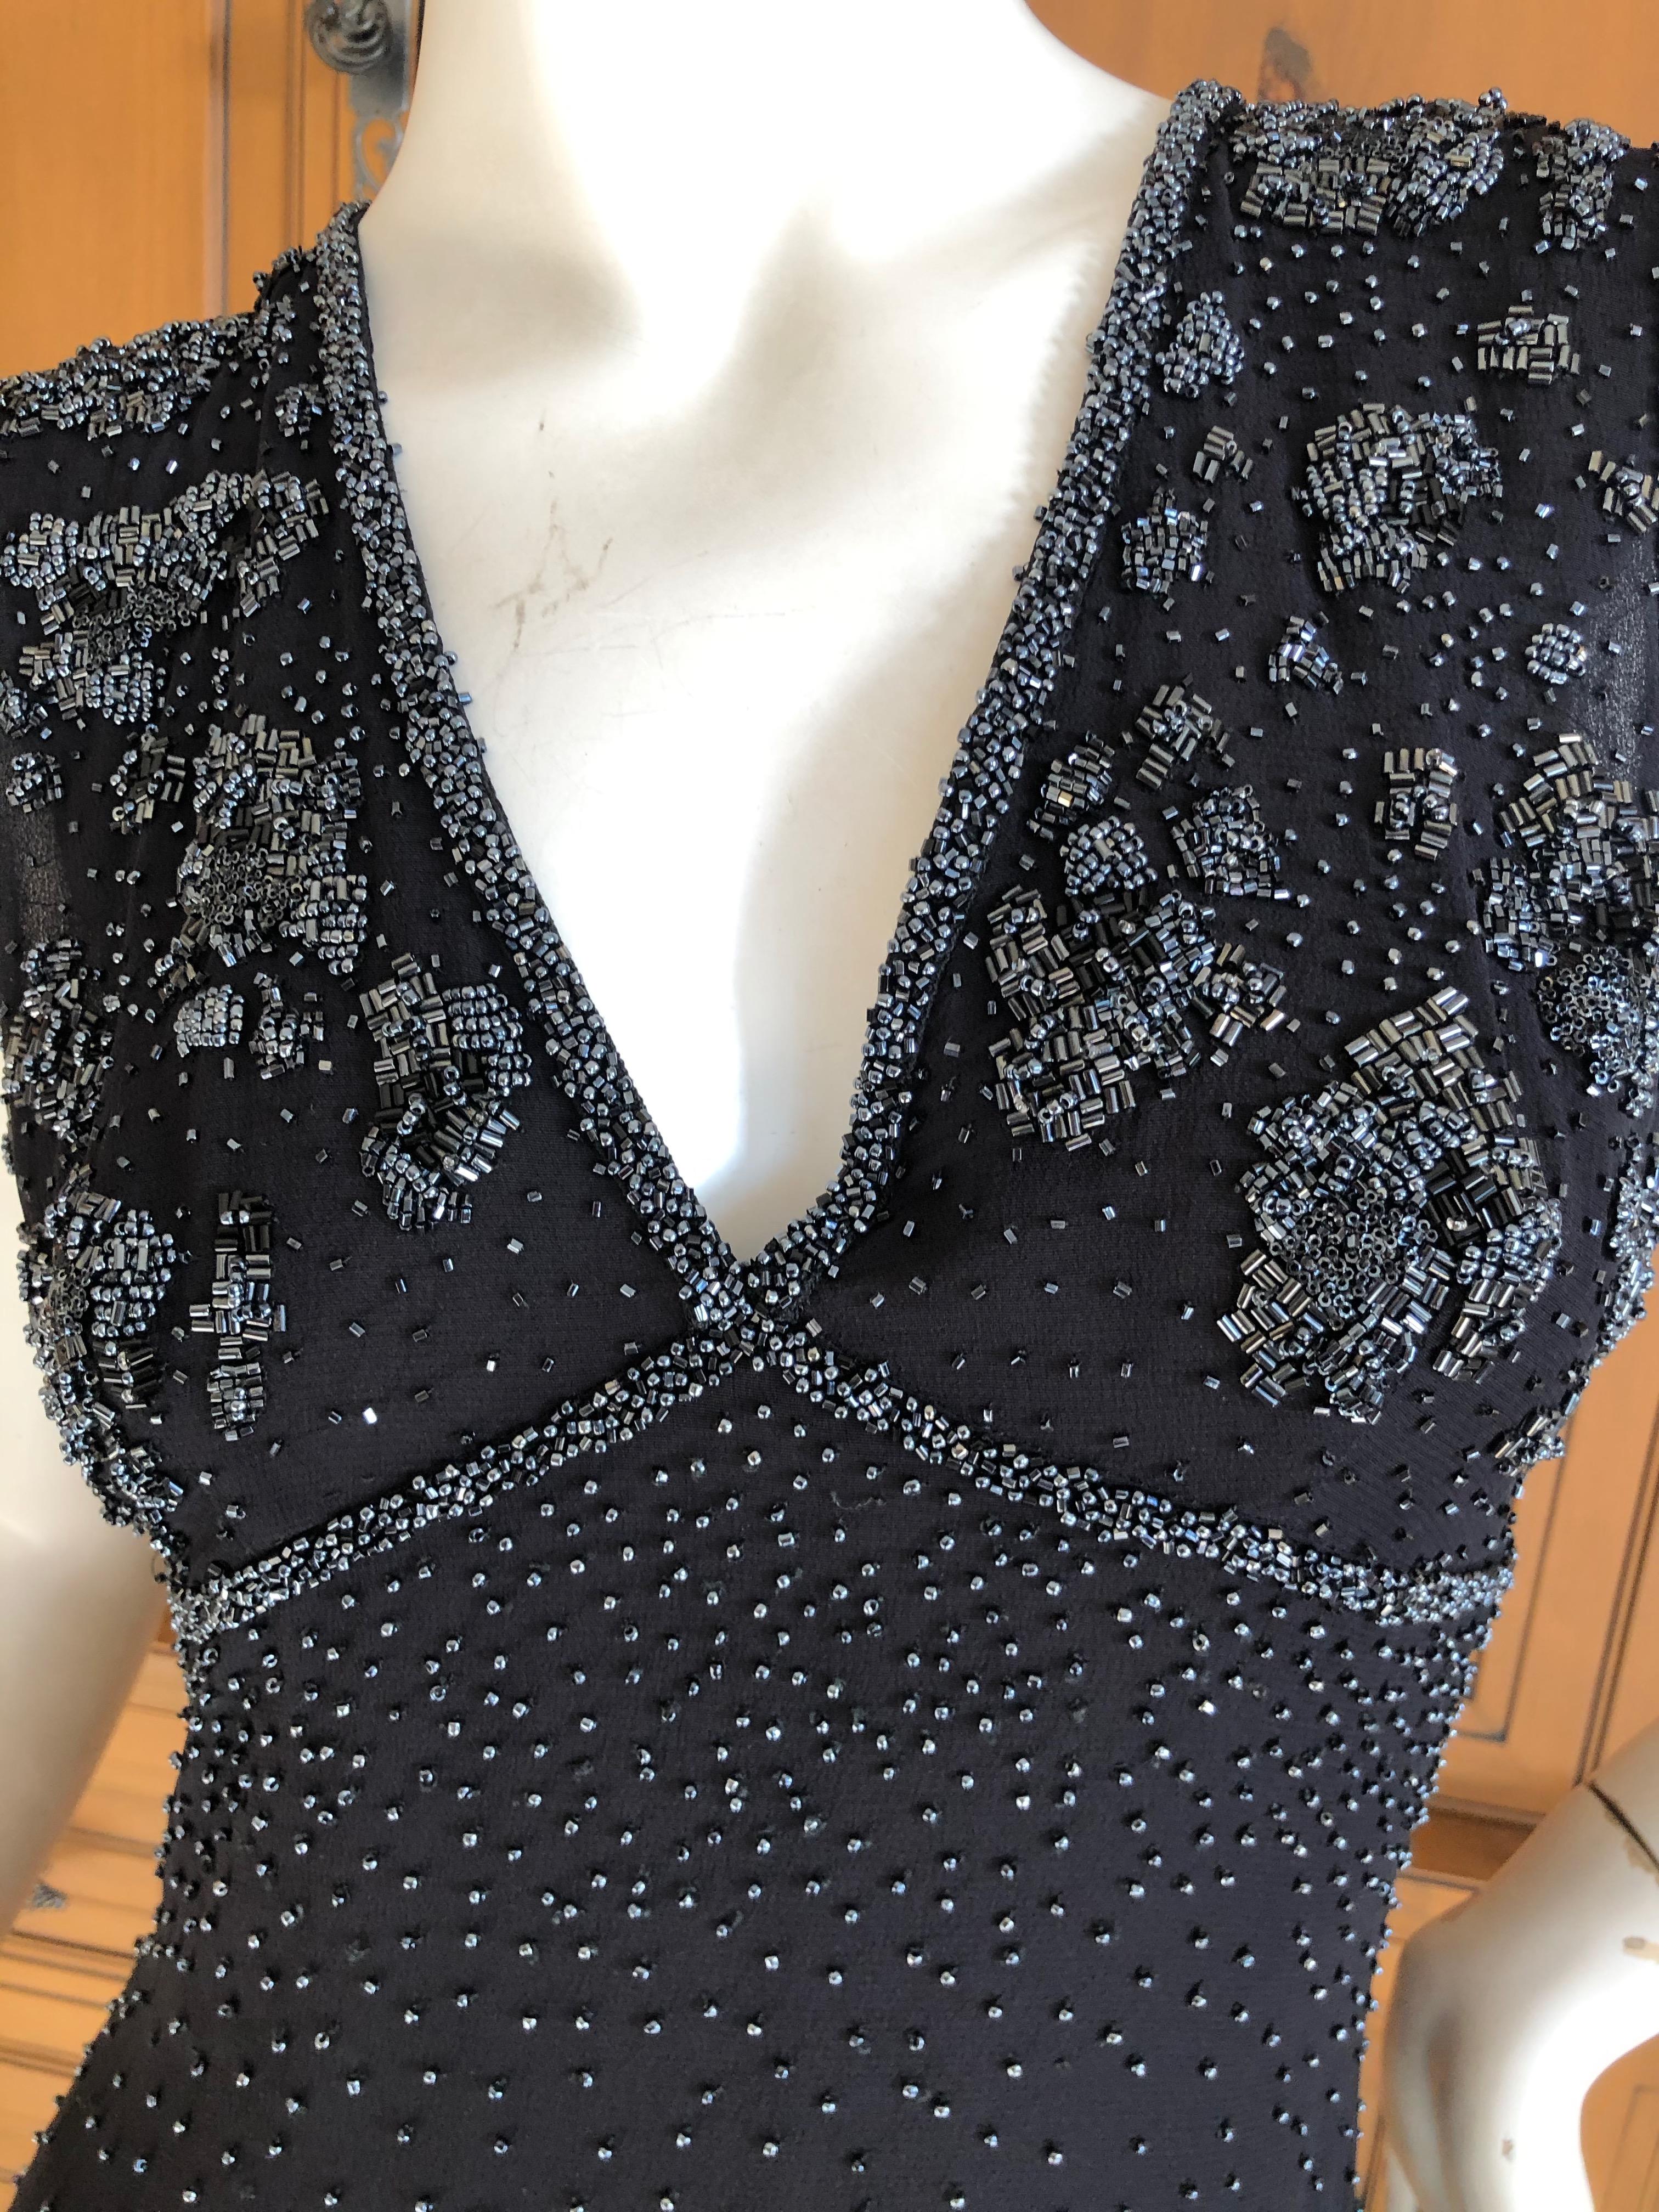 Emanuel Ungaro Parallel Vintage Black Evening Dress w Hematite Seed Bead Details In Excellent Condition For Sale In Cloverdale, CA